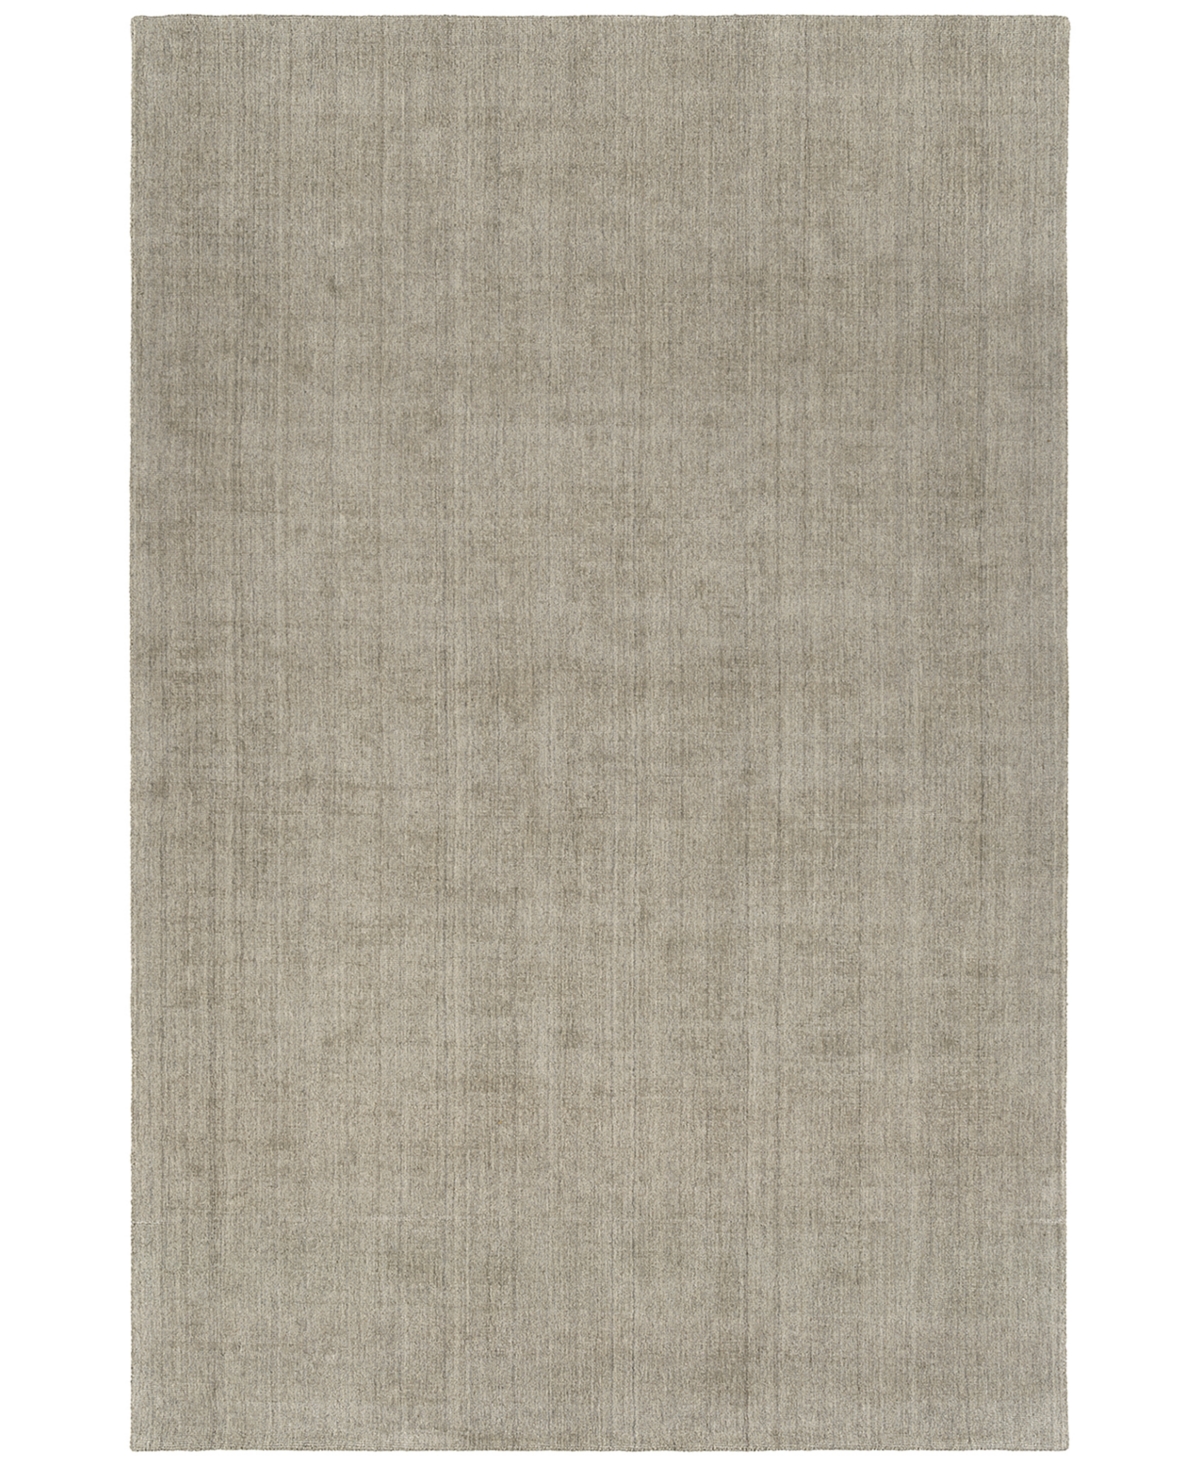 Stanton Rug Company Faye Fy100 Area Rug, 8' X 10' In Gray/ivory